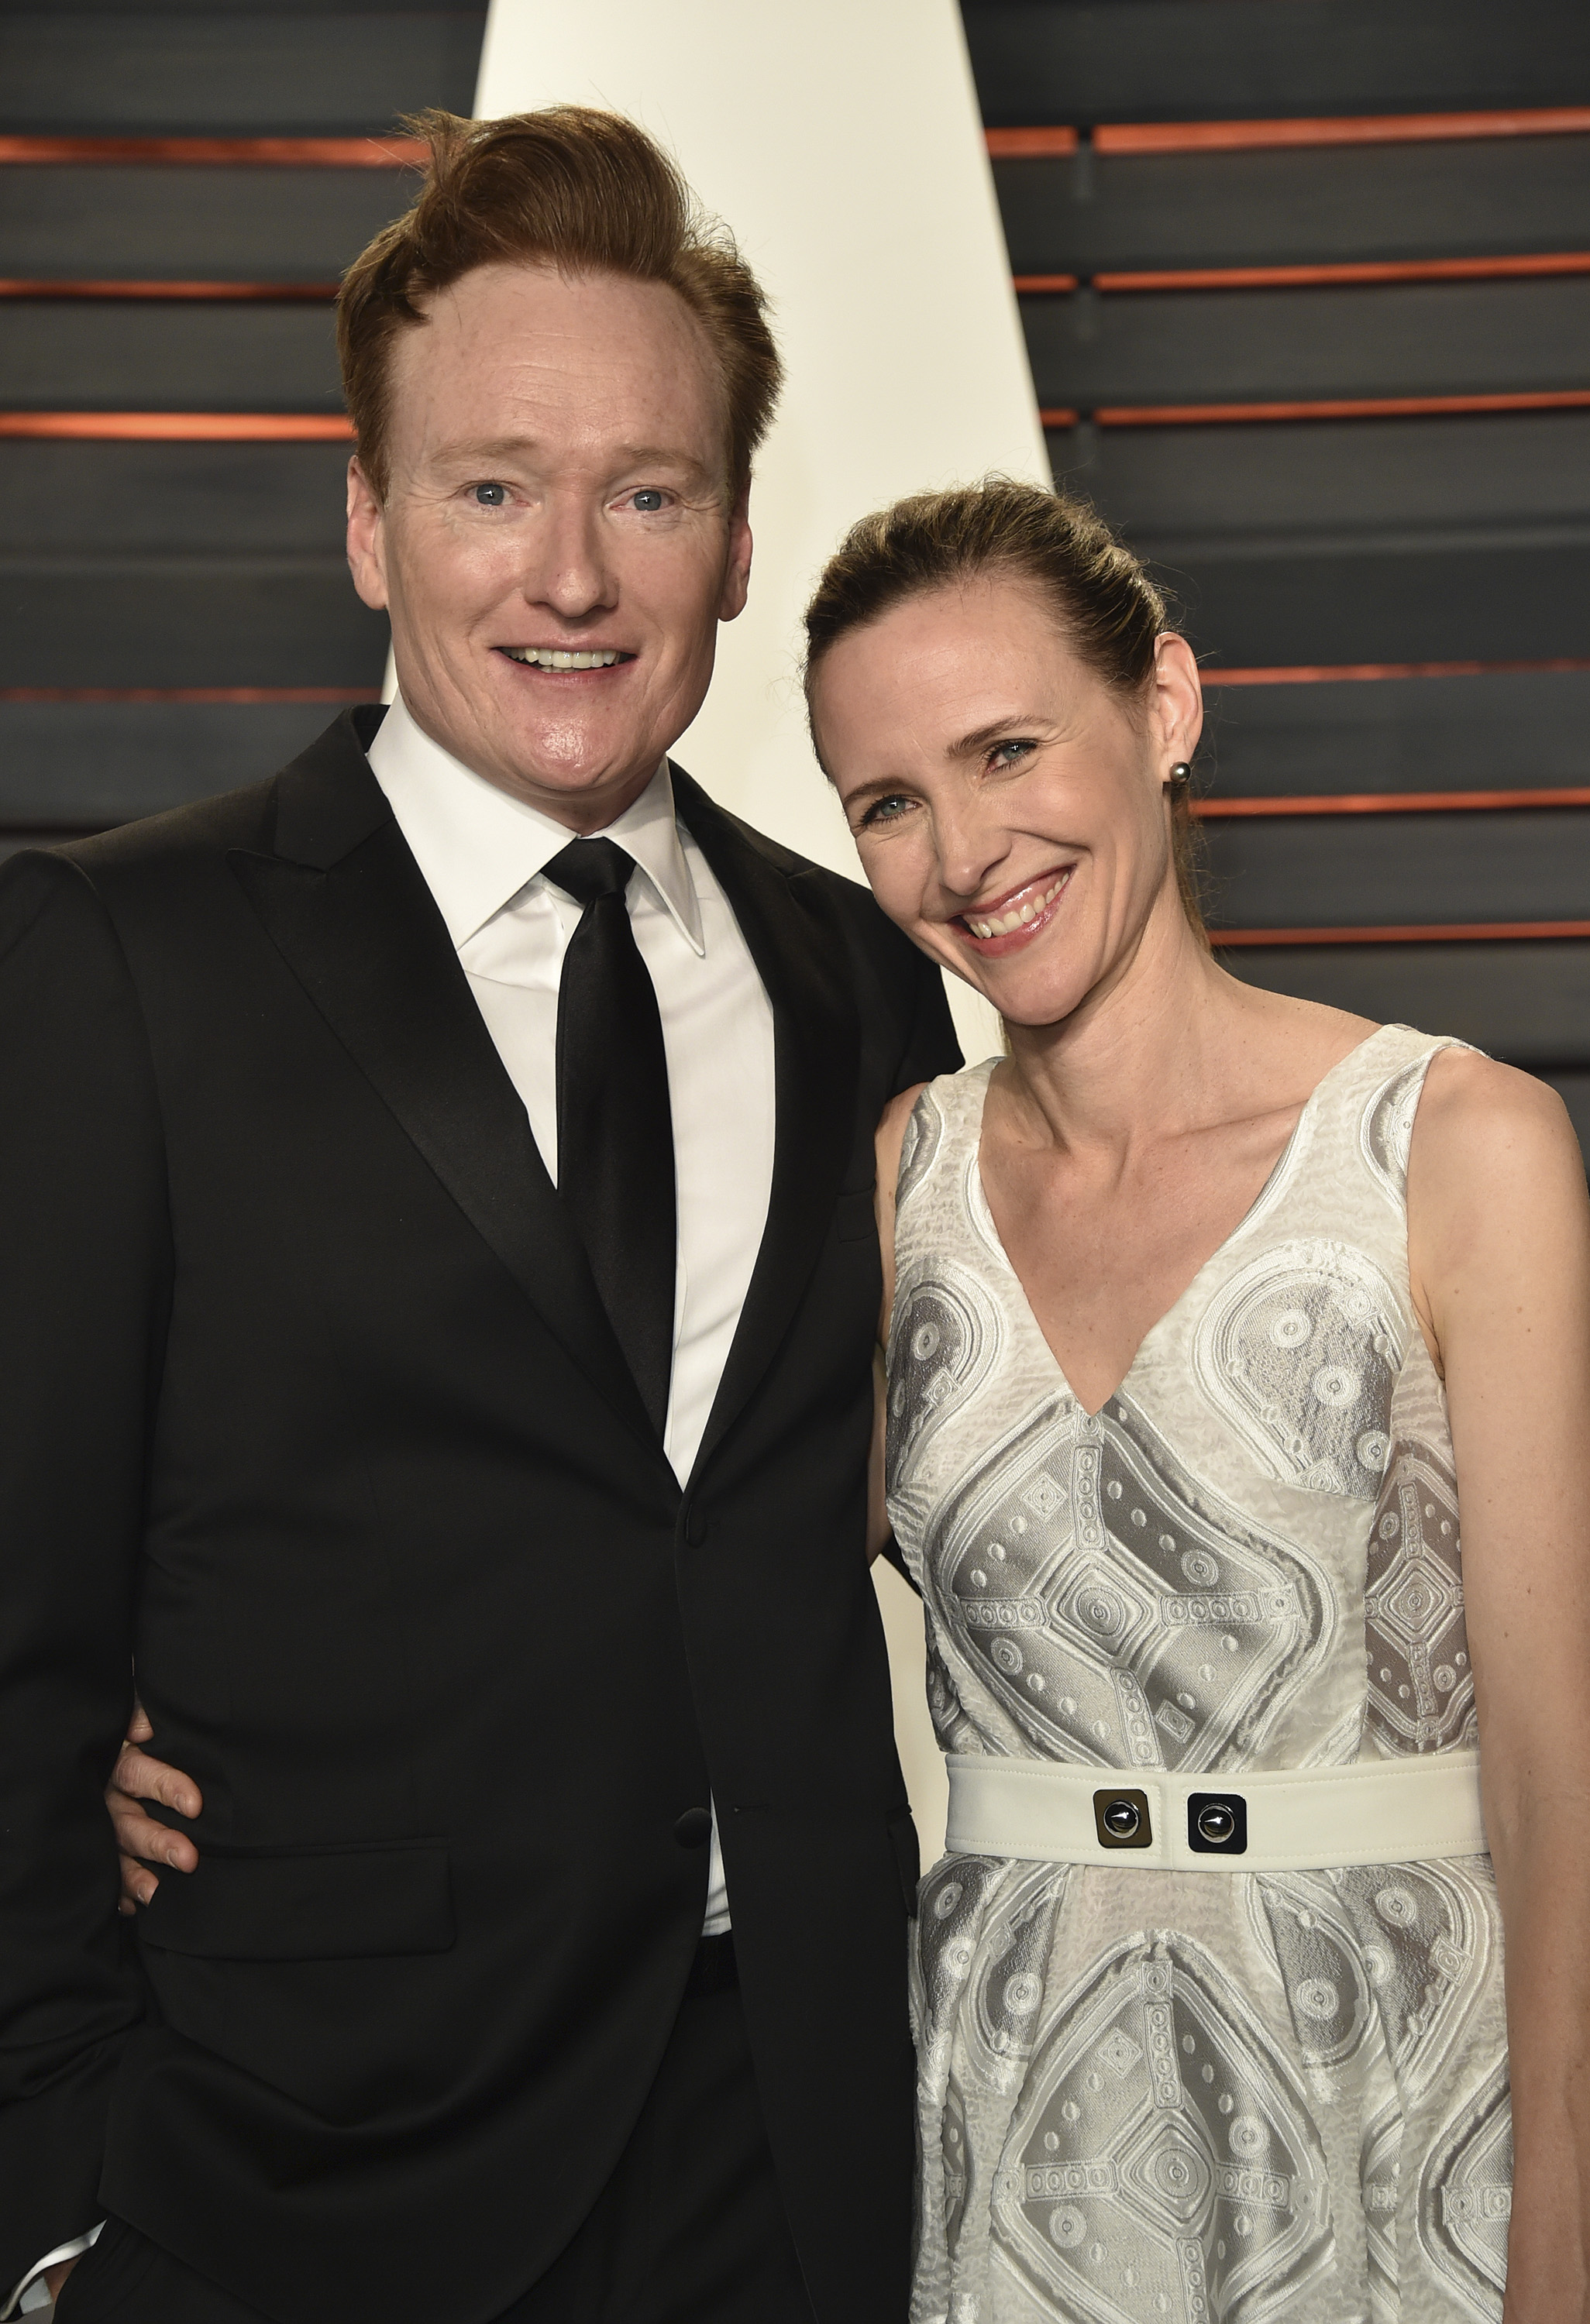 Conan O'Brien and Liza Powel at the 2016 Vanity Fair Oscar Party Hosted By Graydon Carter on February 28, 2016, in Beverly Hills | Source: Getty Images